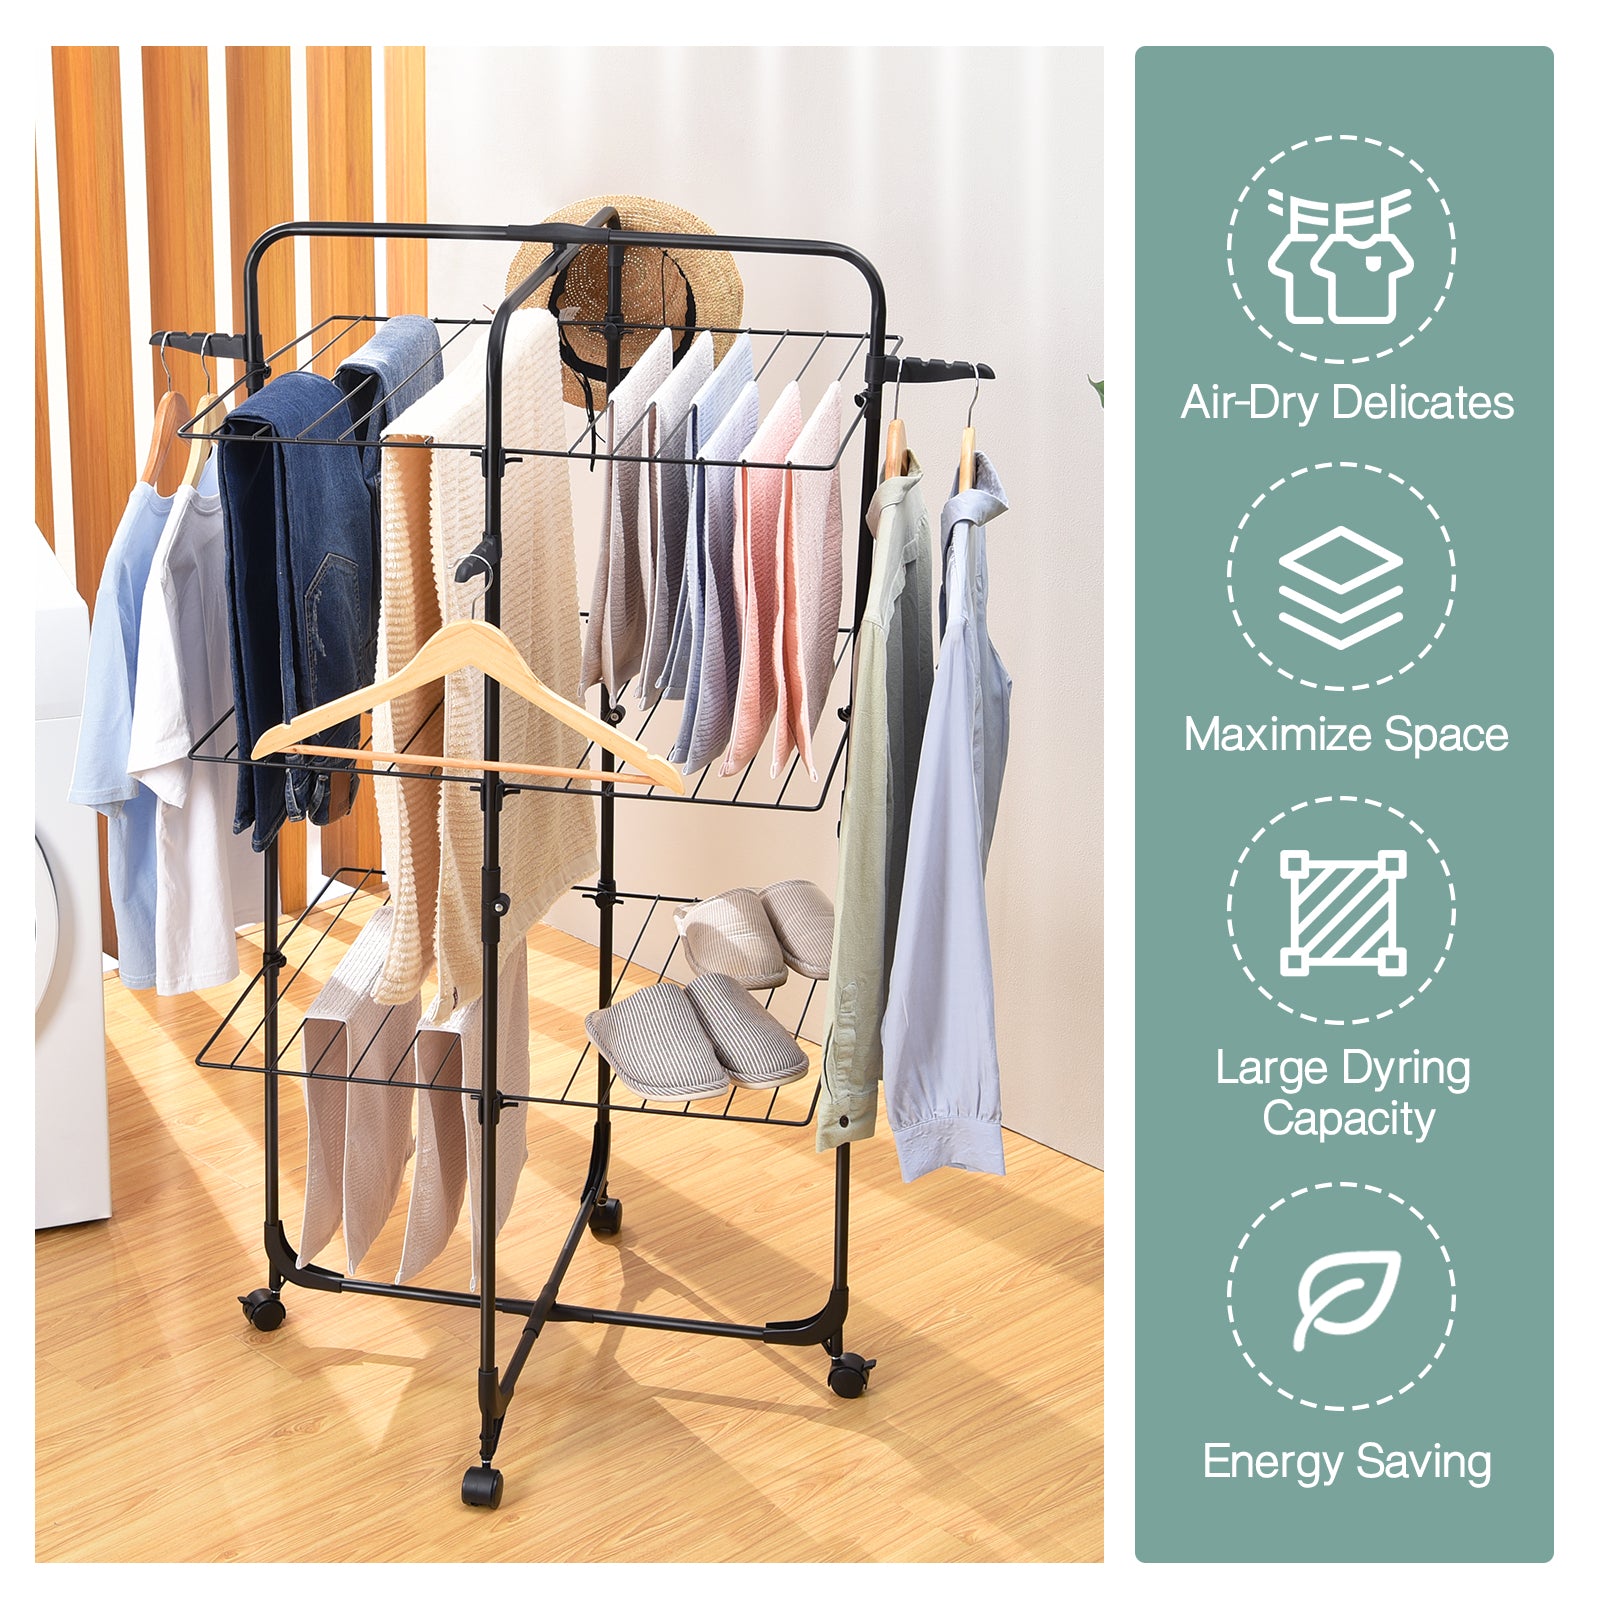 Laundry Clothes Storage Drying Rack Portable Folding Dryer Hanger Heavy Duty - Wite